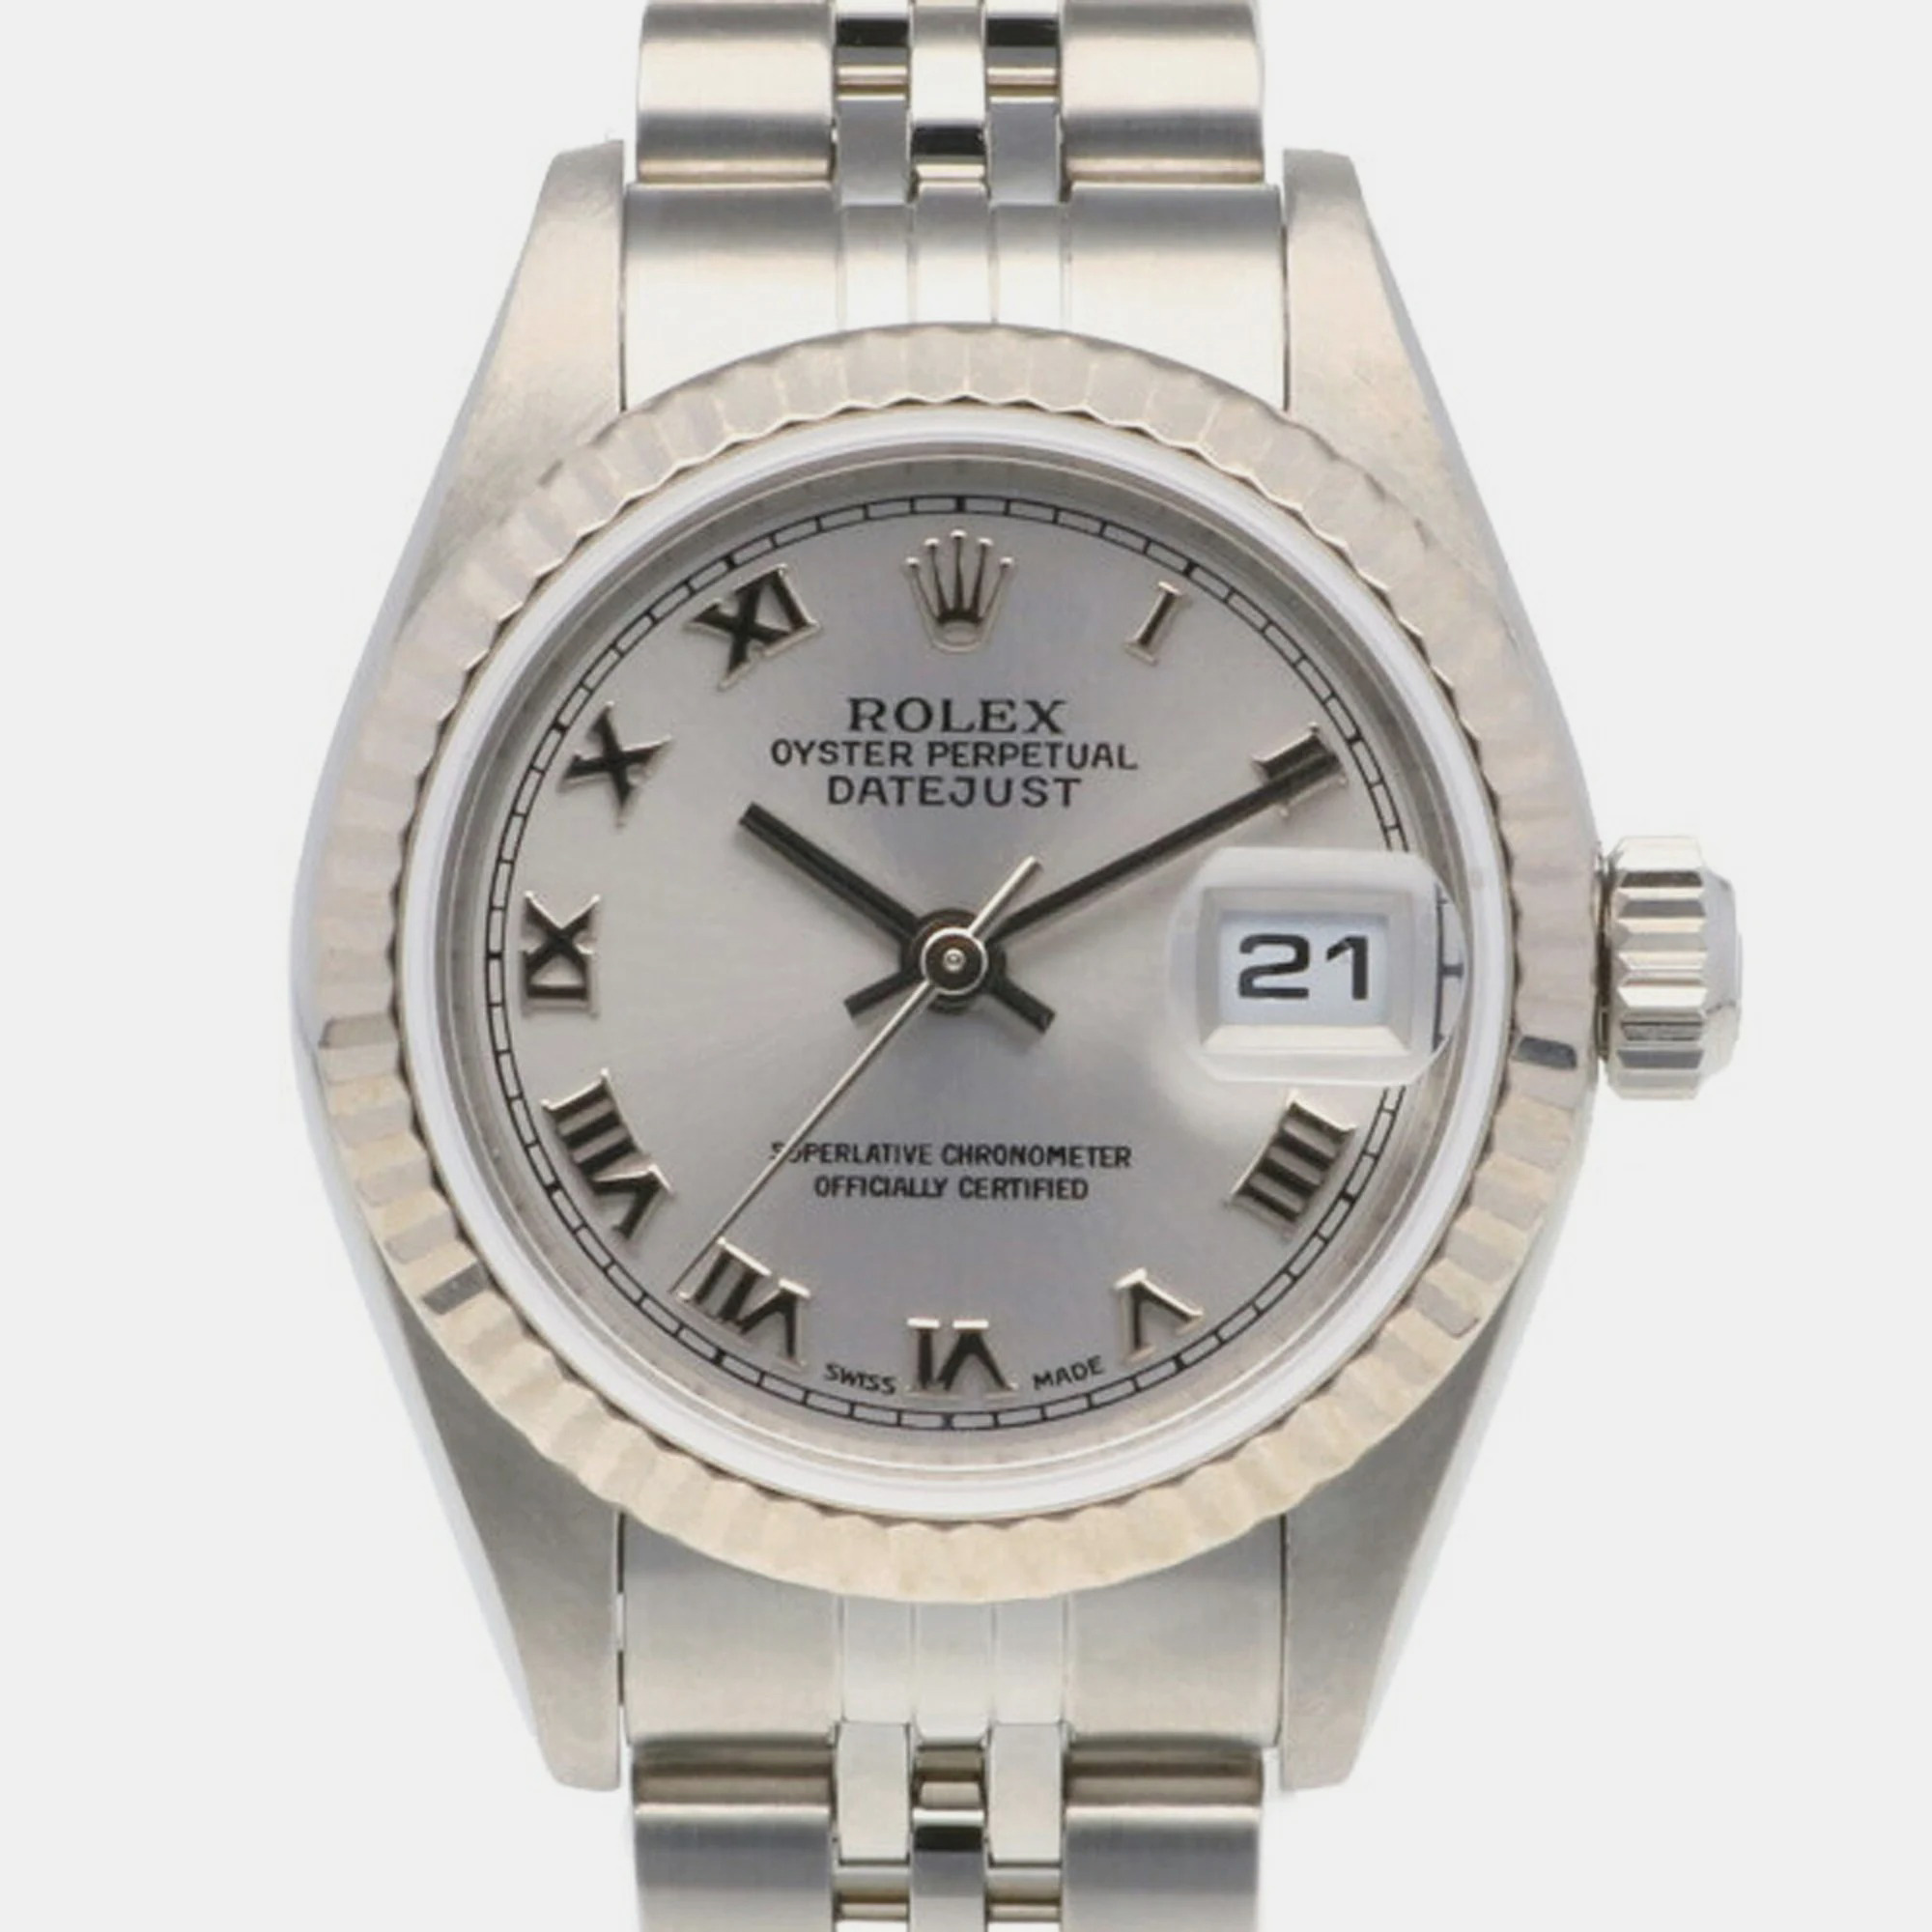 Rolex Silver 18K White Gold And Stainless Steel Datejust 79174 Automatic Women's Wristwatch 26 Mm